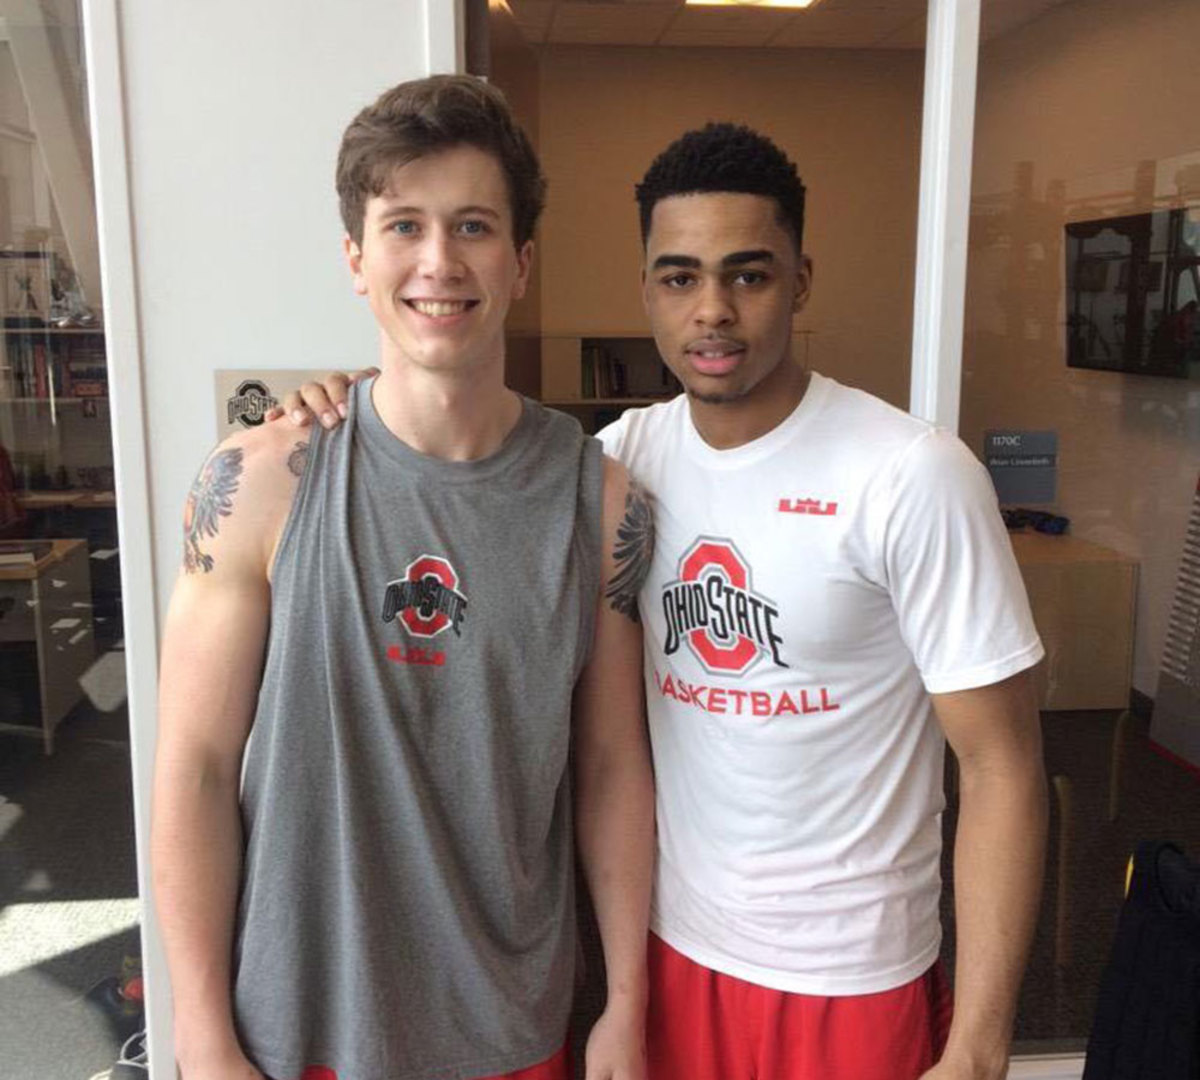 Former Ohio State walk-on Jake Lorbach with former Buckeye D'Angelo Russell.